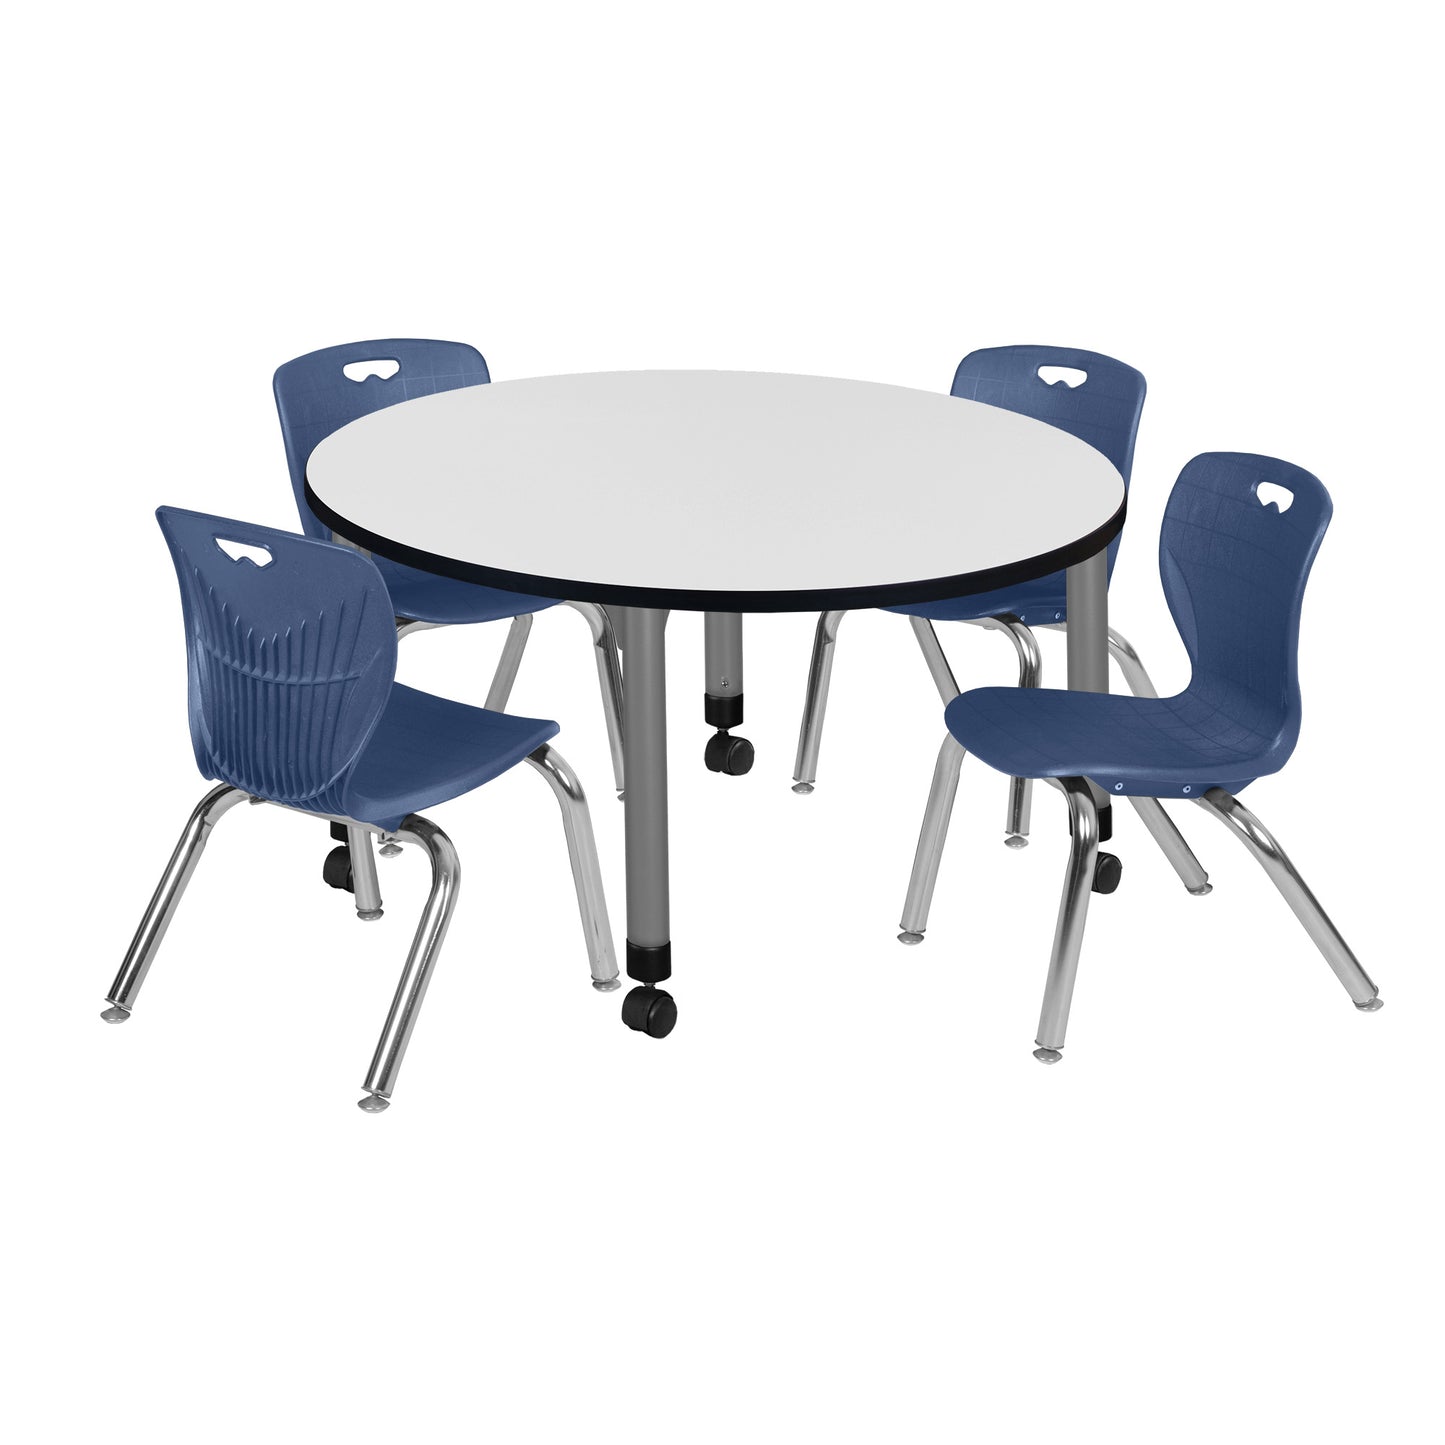 Regency Kee 36 in. Round Adjustable Classroom Table & 4 Andy 12 in. Stack Chairs